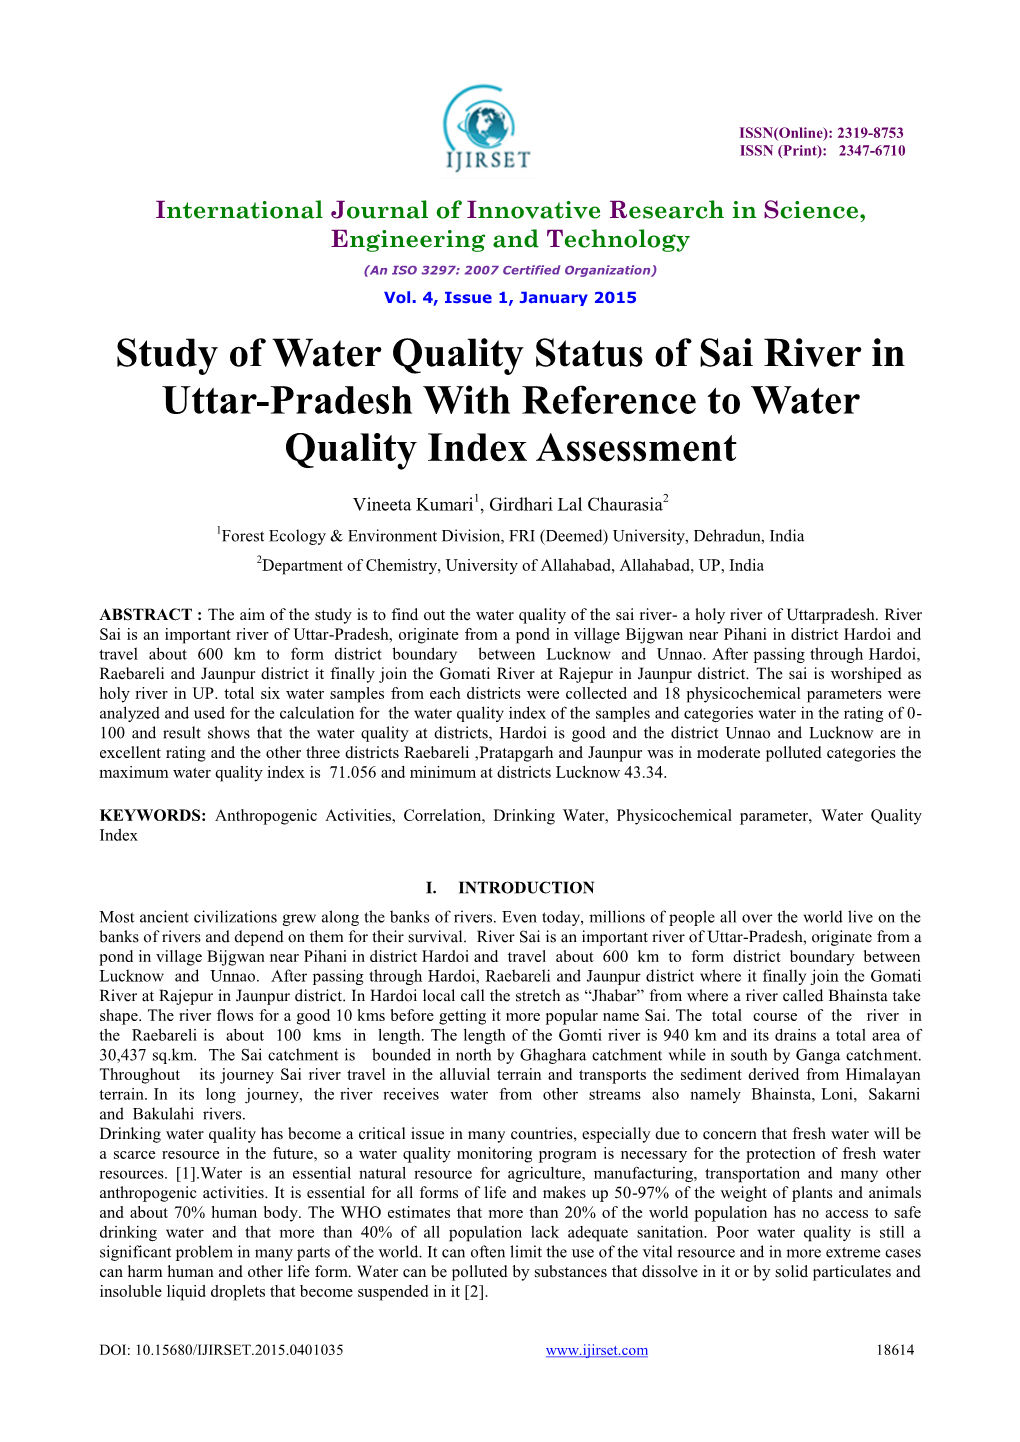 Study of Water Quality Status of Sai River in Uttar-Pradesh with Reference to Water Quality Index Assessment